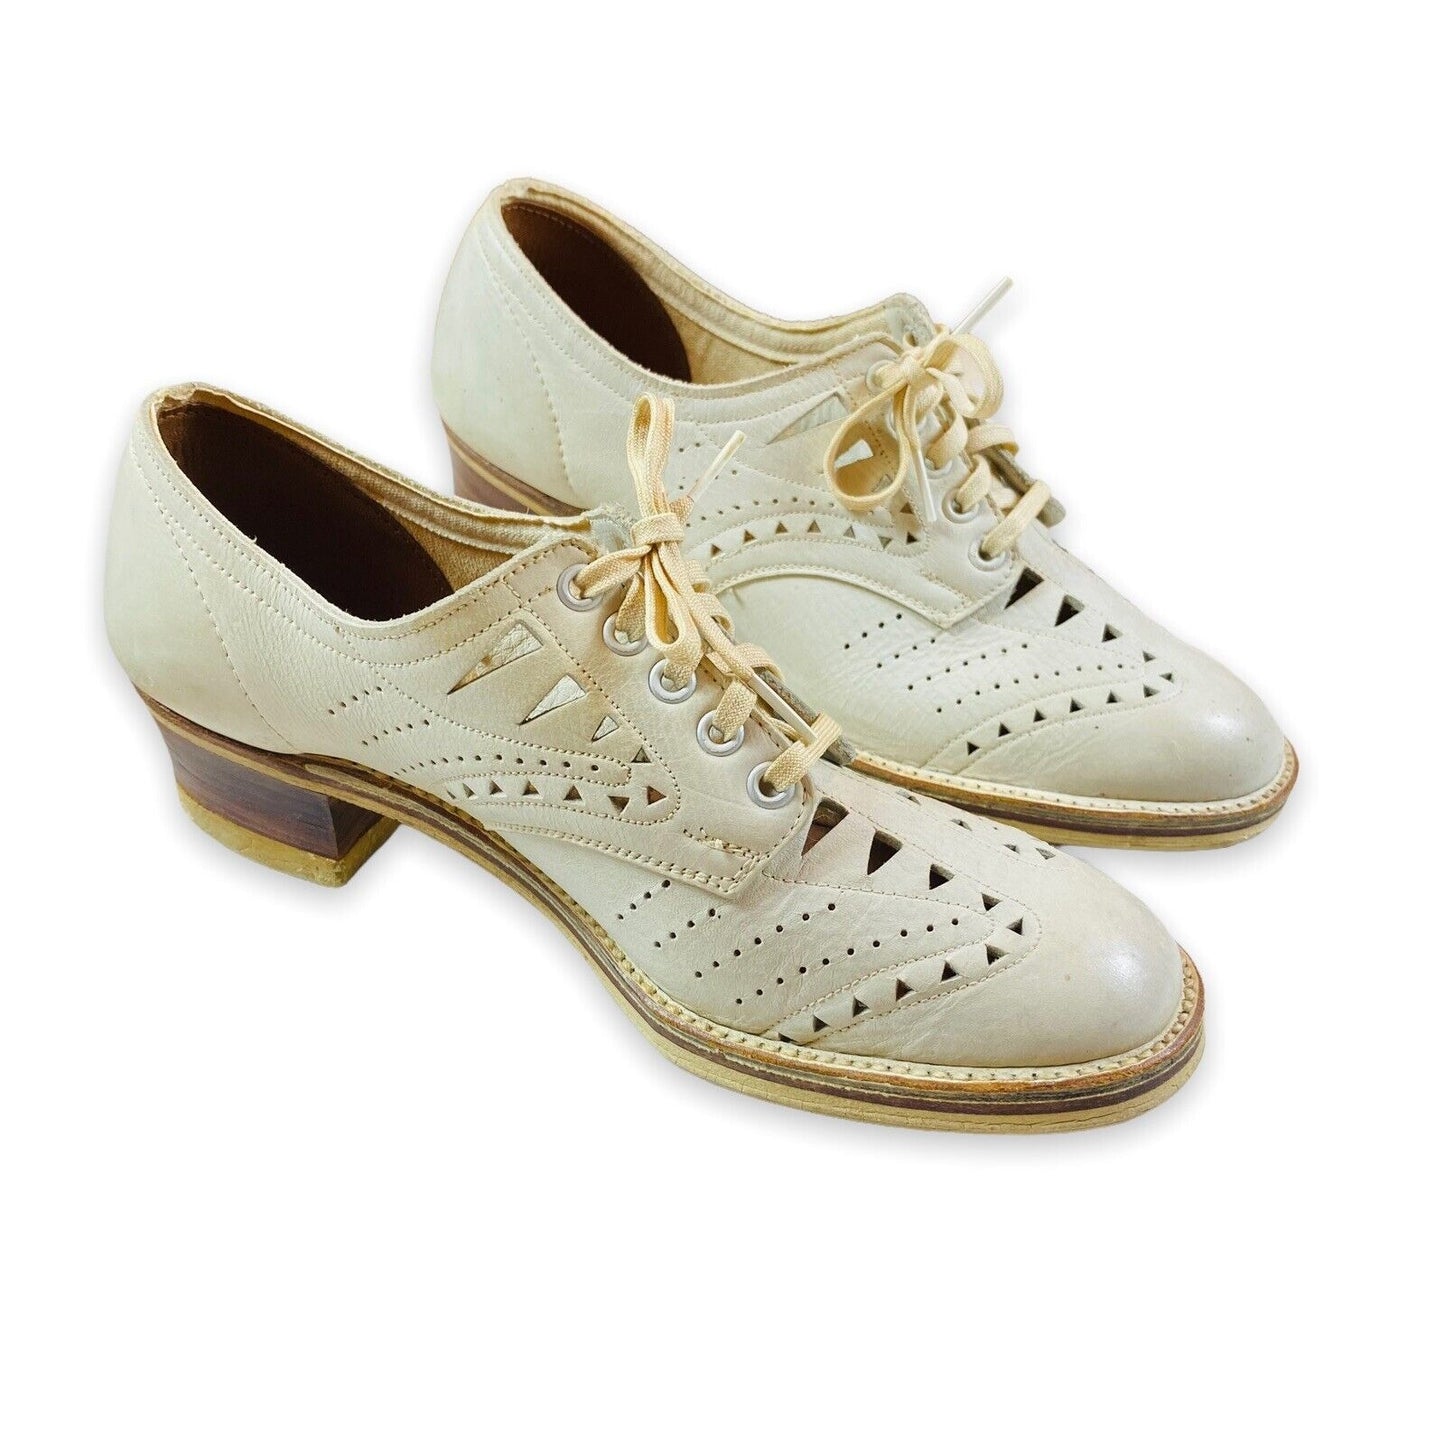 Vintage White Oxford Pumps Lace Up 1940's Style Women's or Child's Shoes